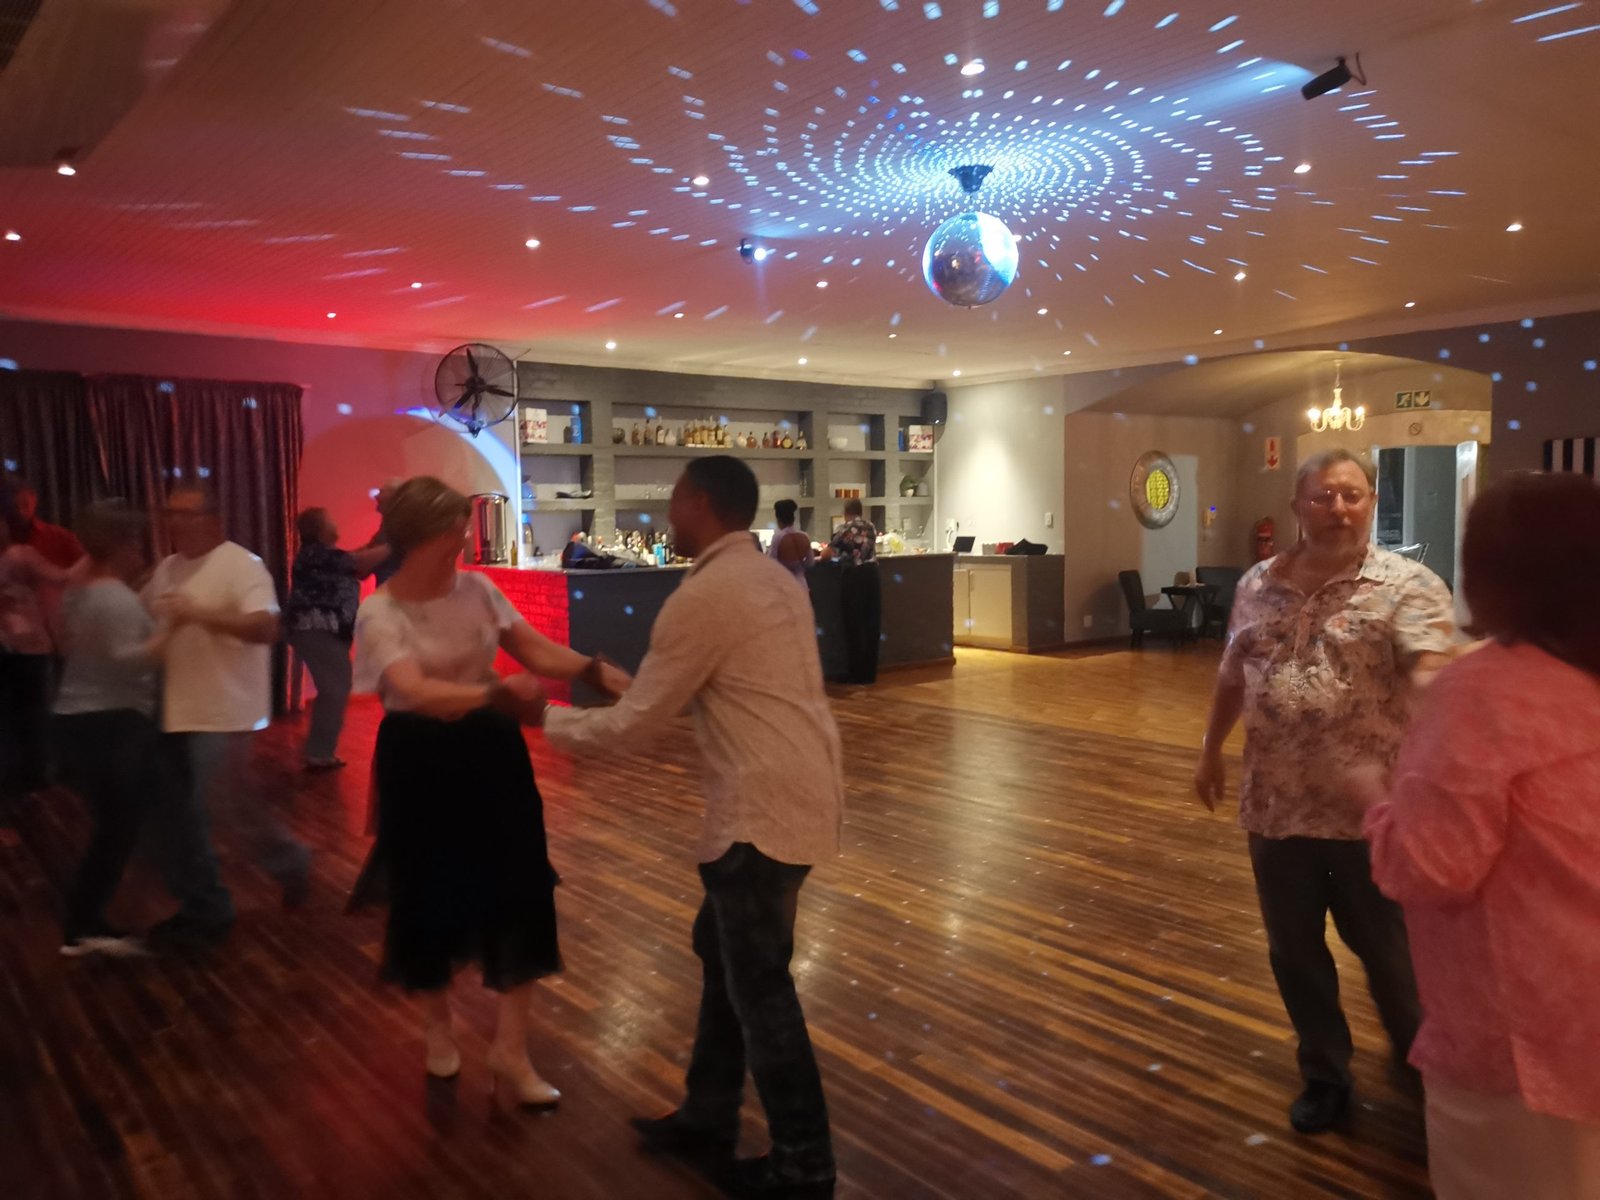 Dancing at Dancemore Dance Studio Spring Social with a mirror ball